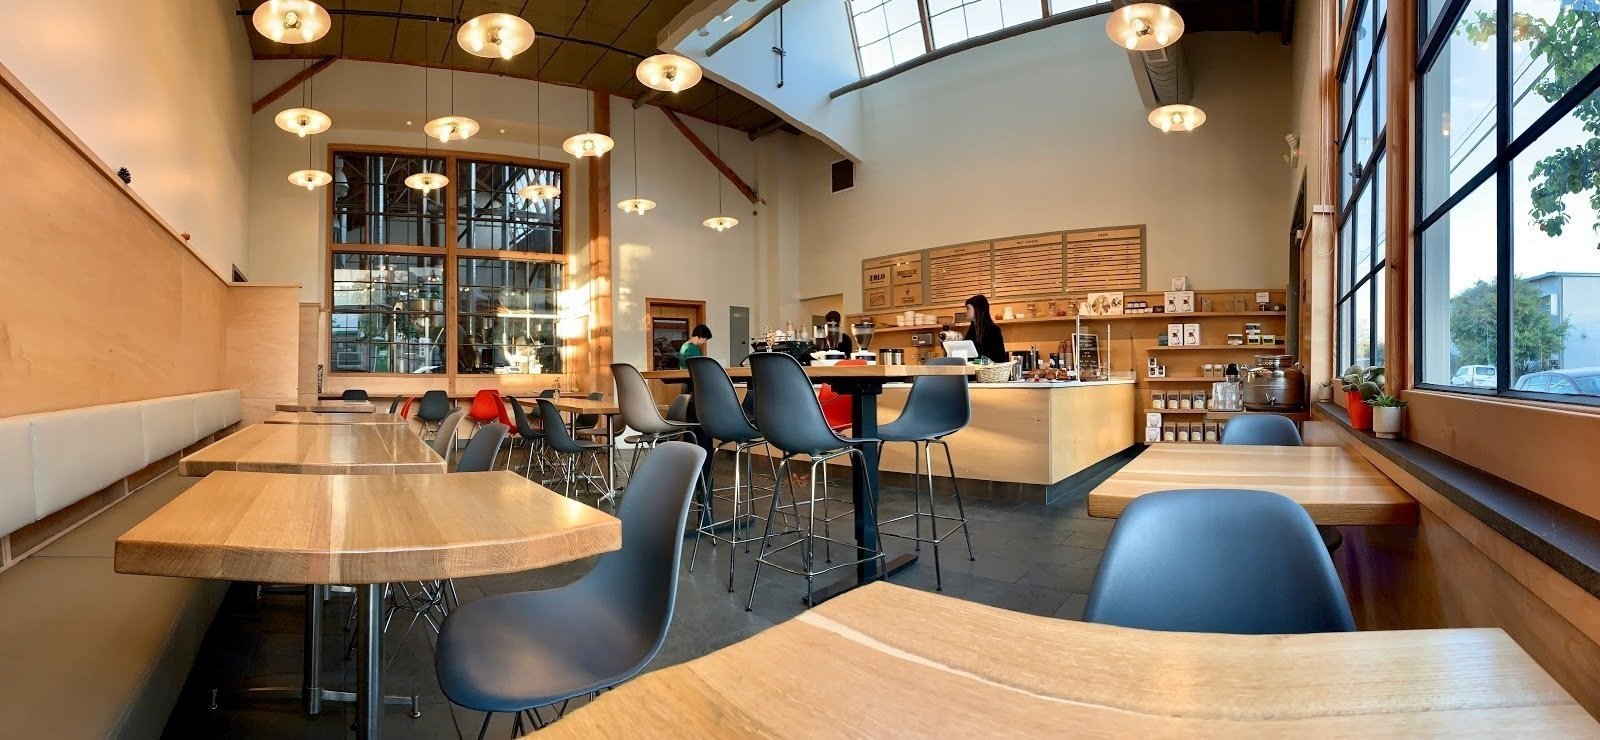 <span class="translation_missing" title="translation missing: en.meta.location_title, location_name: CoRo Coffee Room, city: Berkeley">Location Title</span>